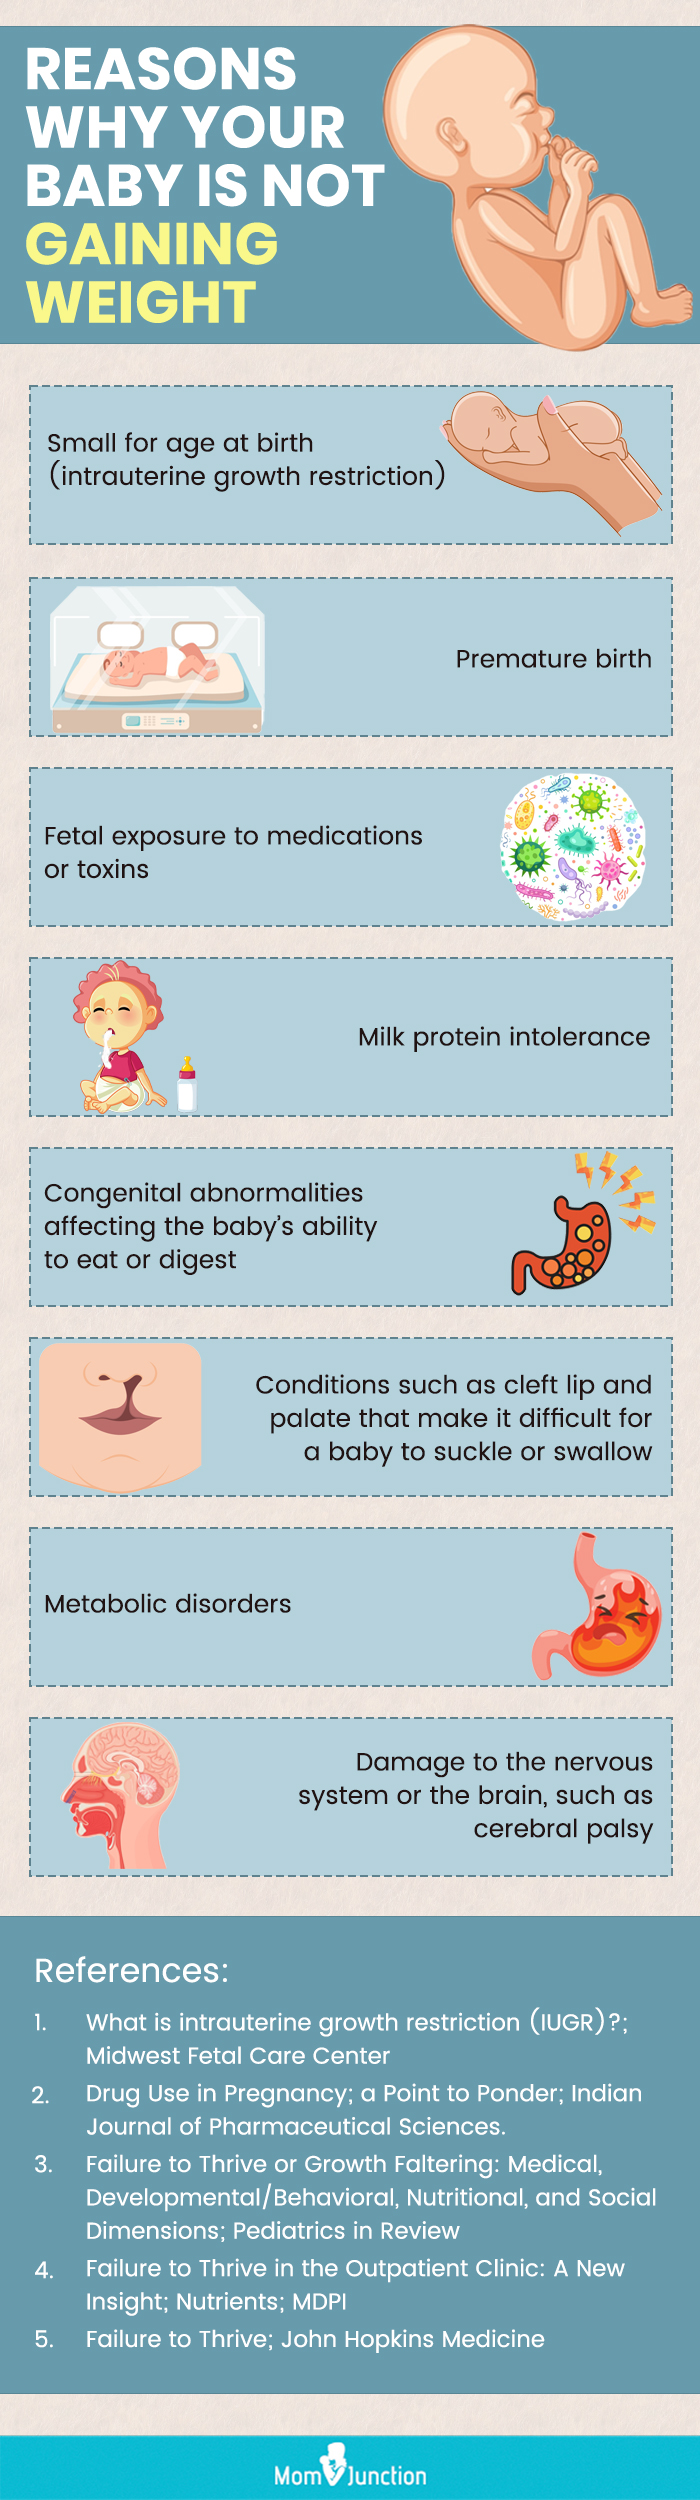 reasons for a baby not gaining weight (infographic)